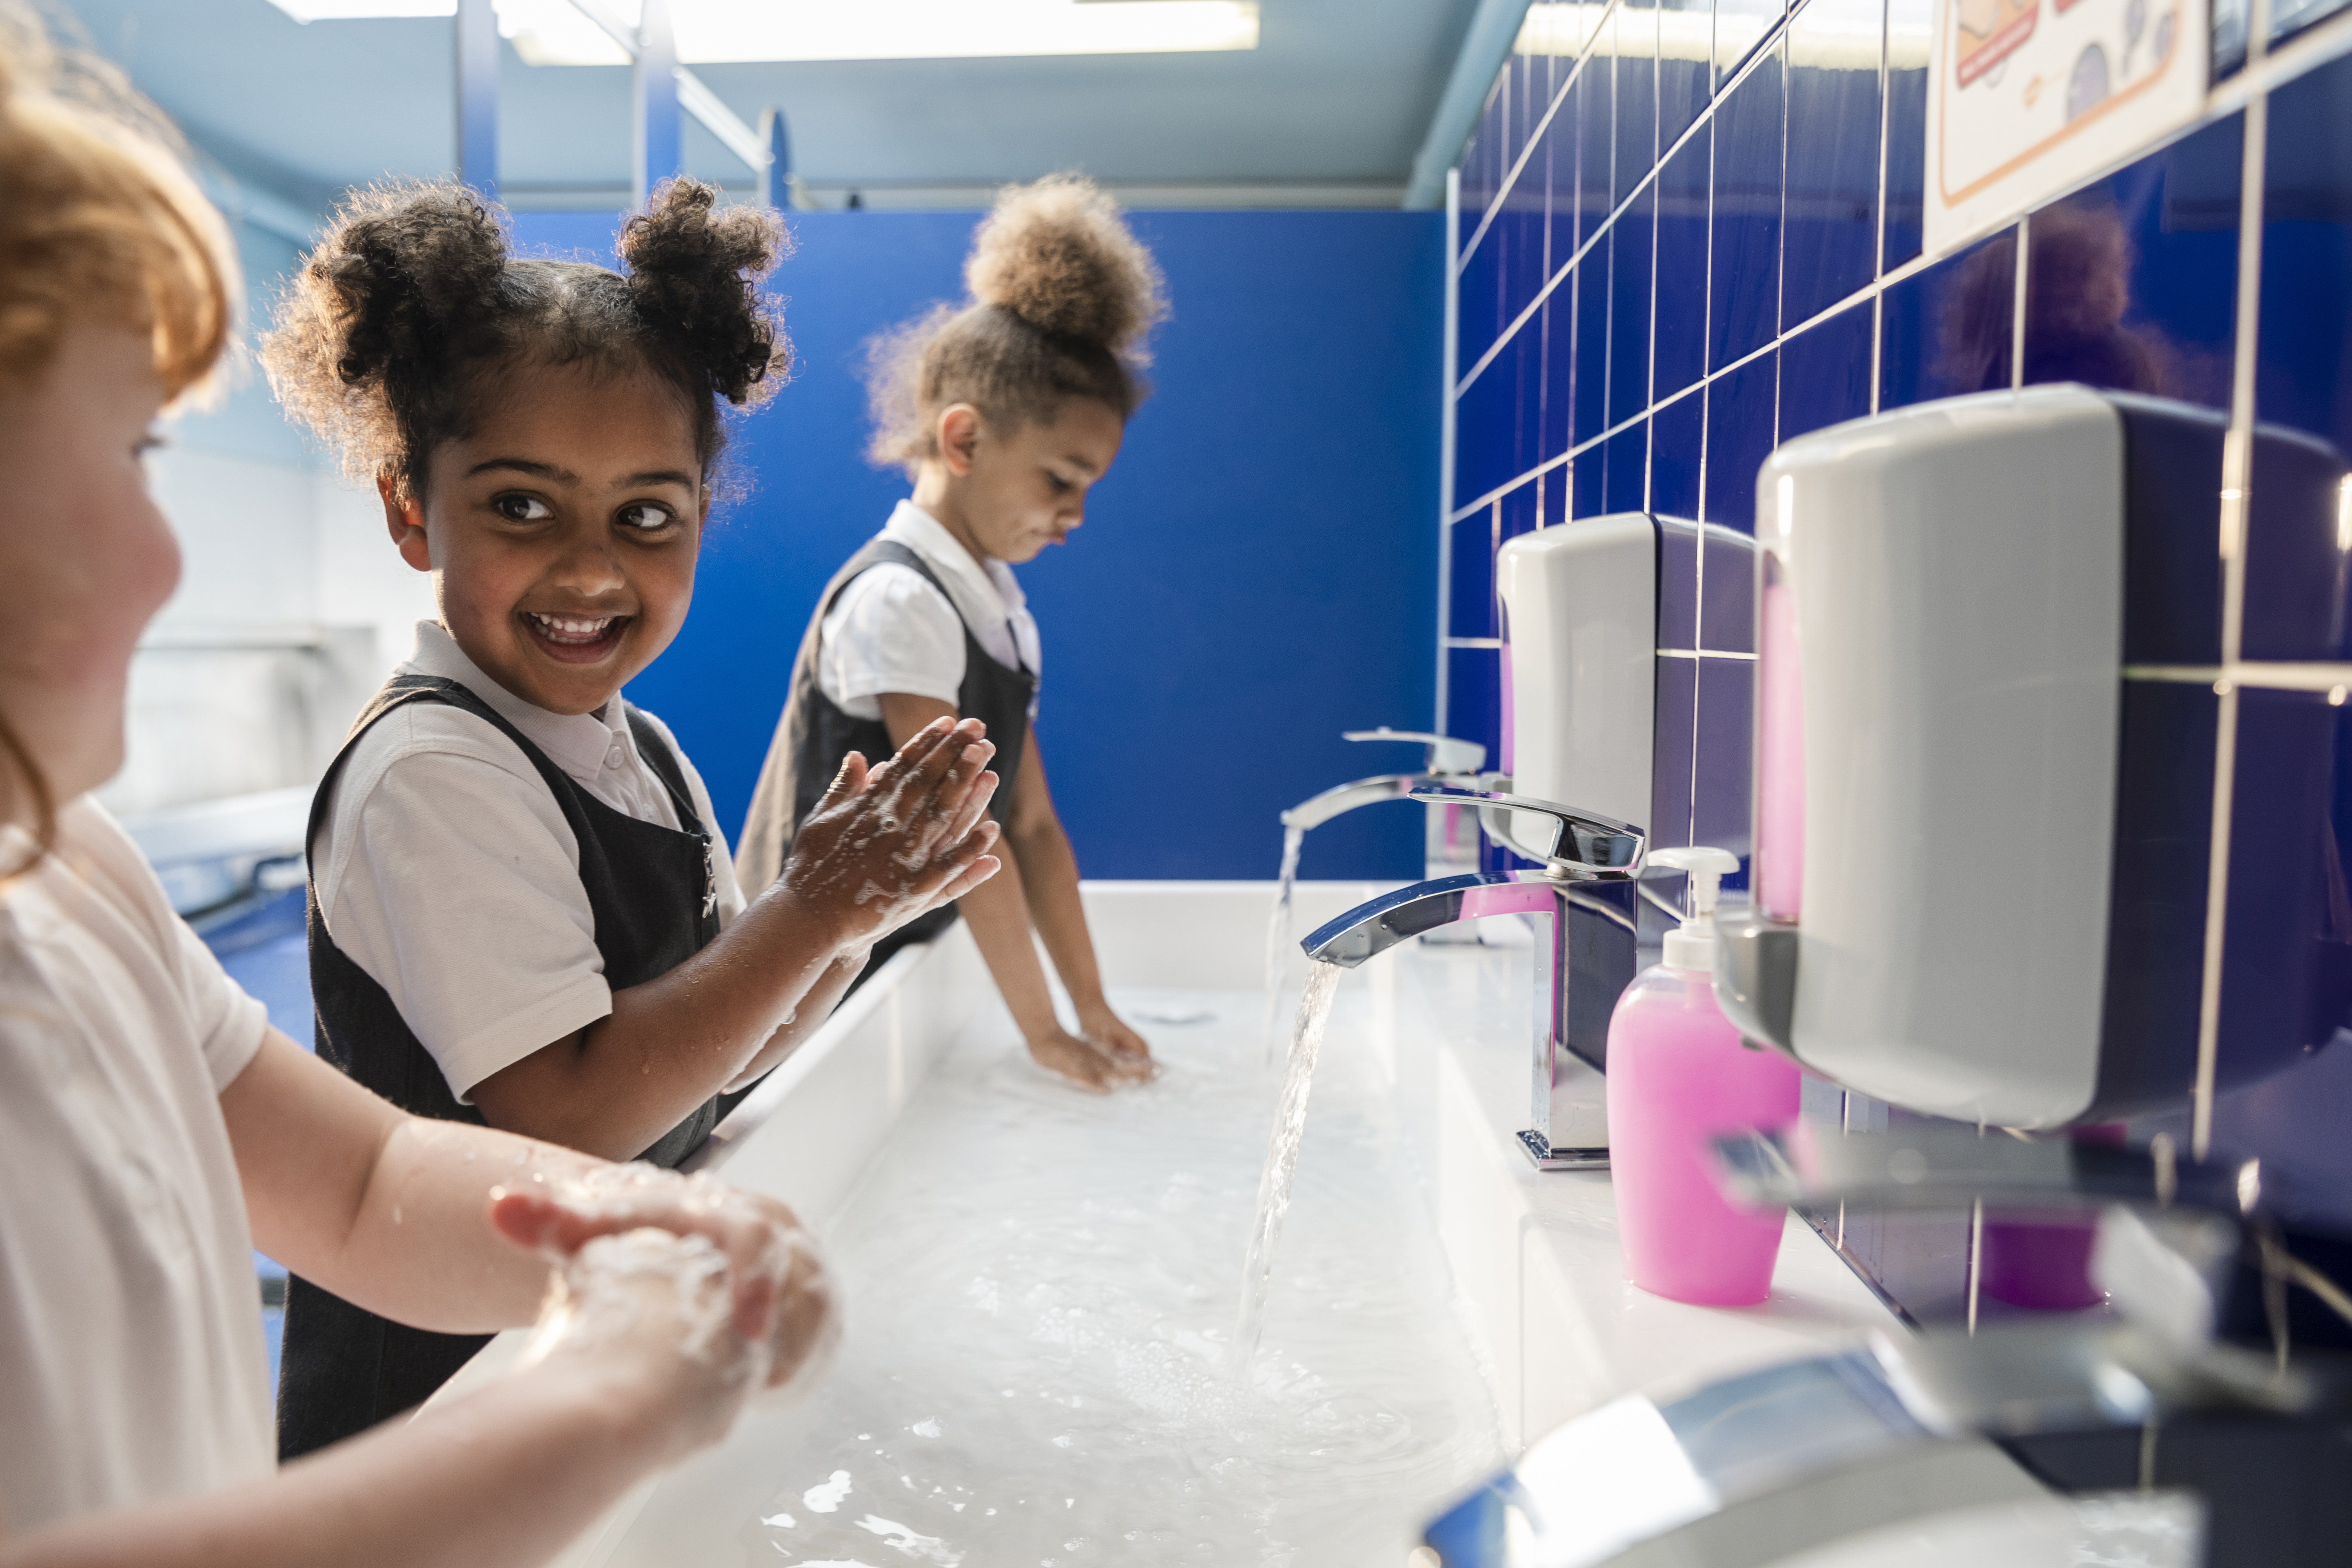 Teach your child how to wash their hands properly to help beat bugs in school toilets